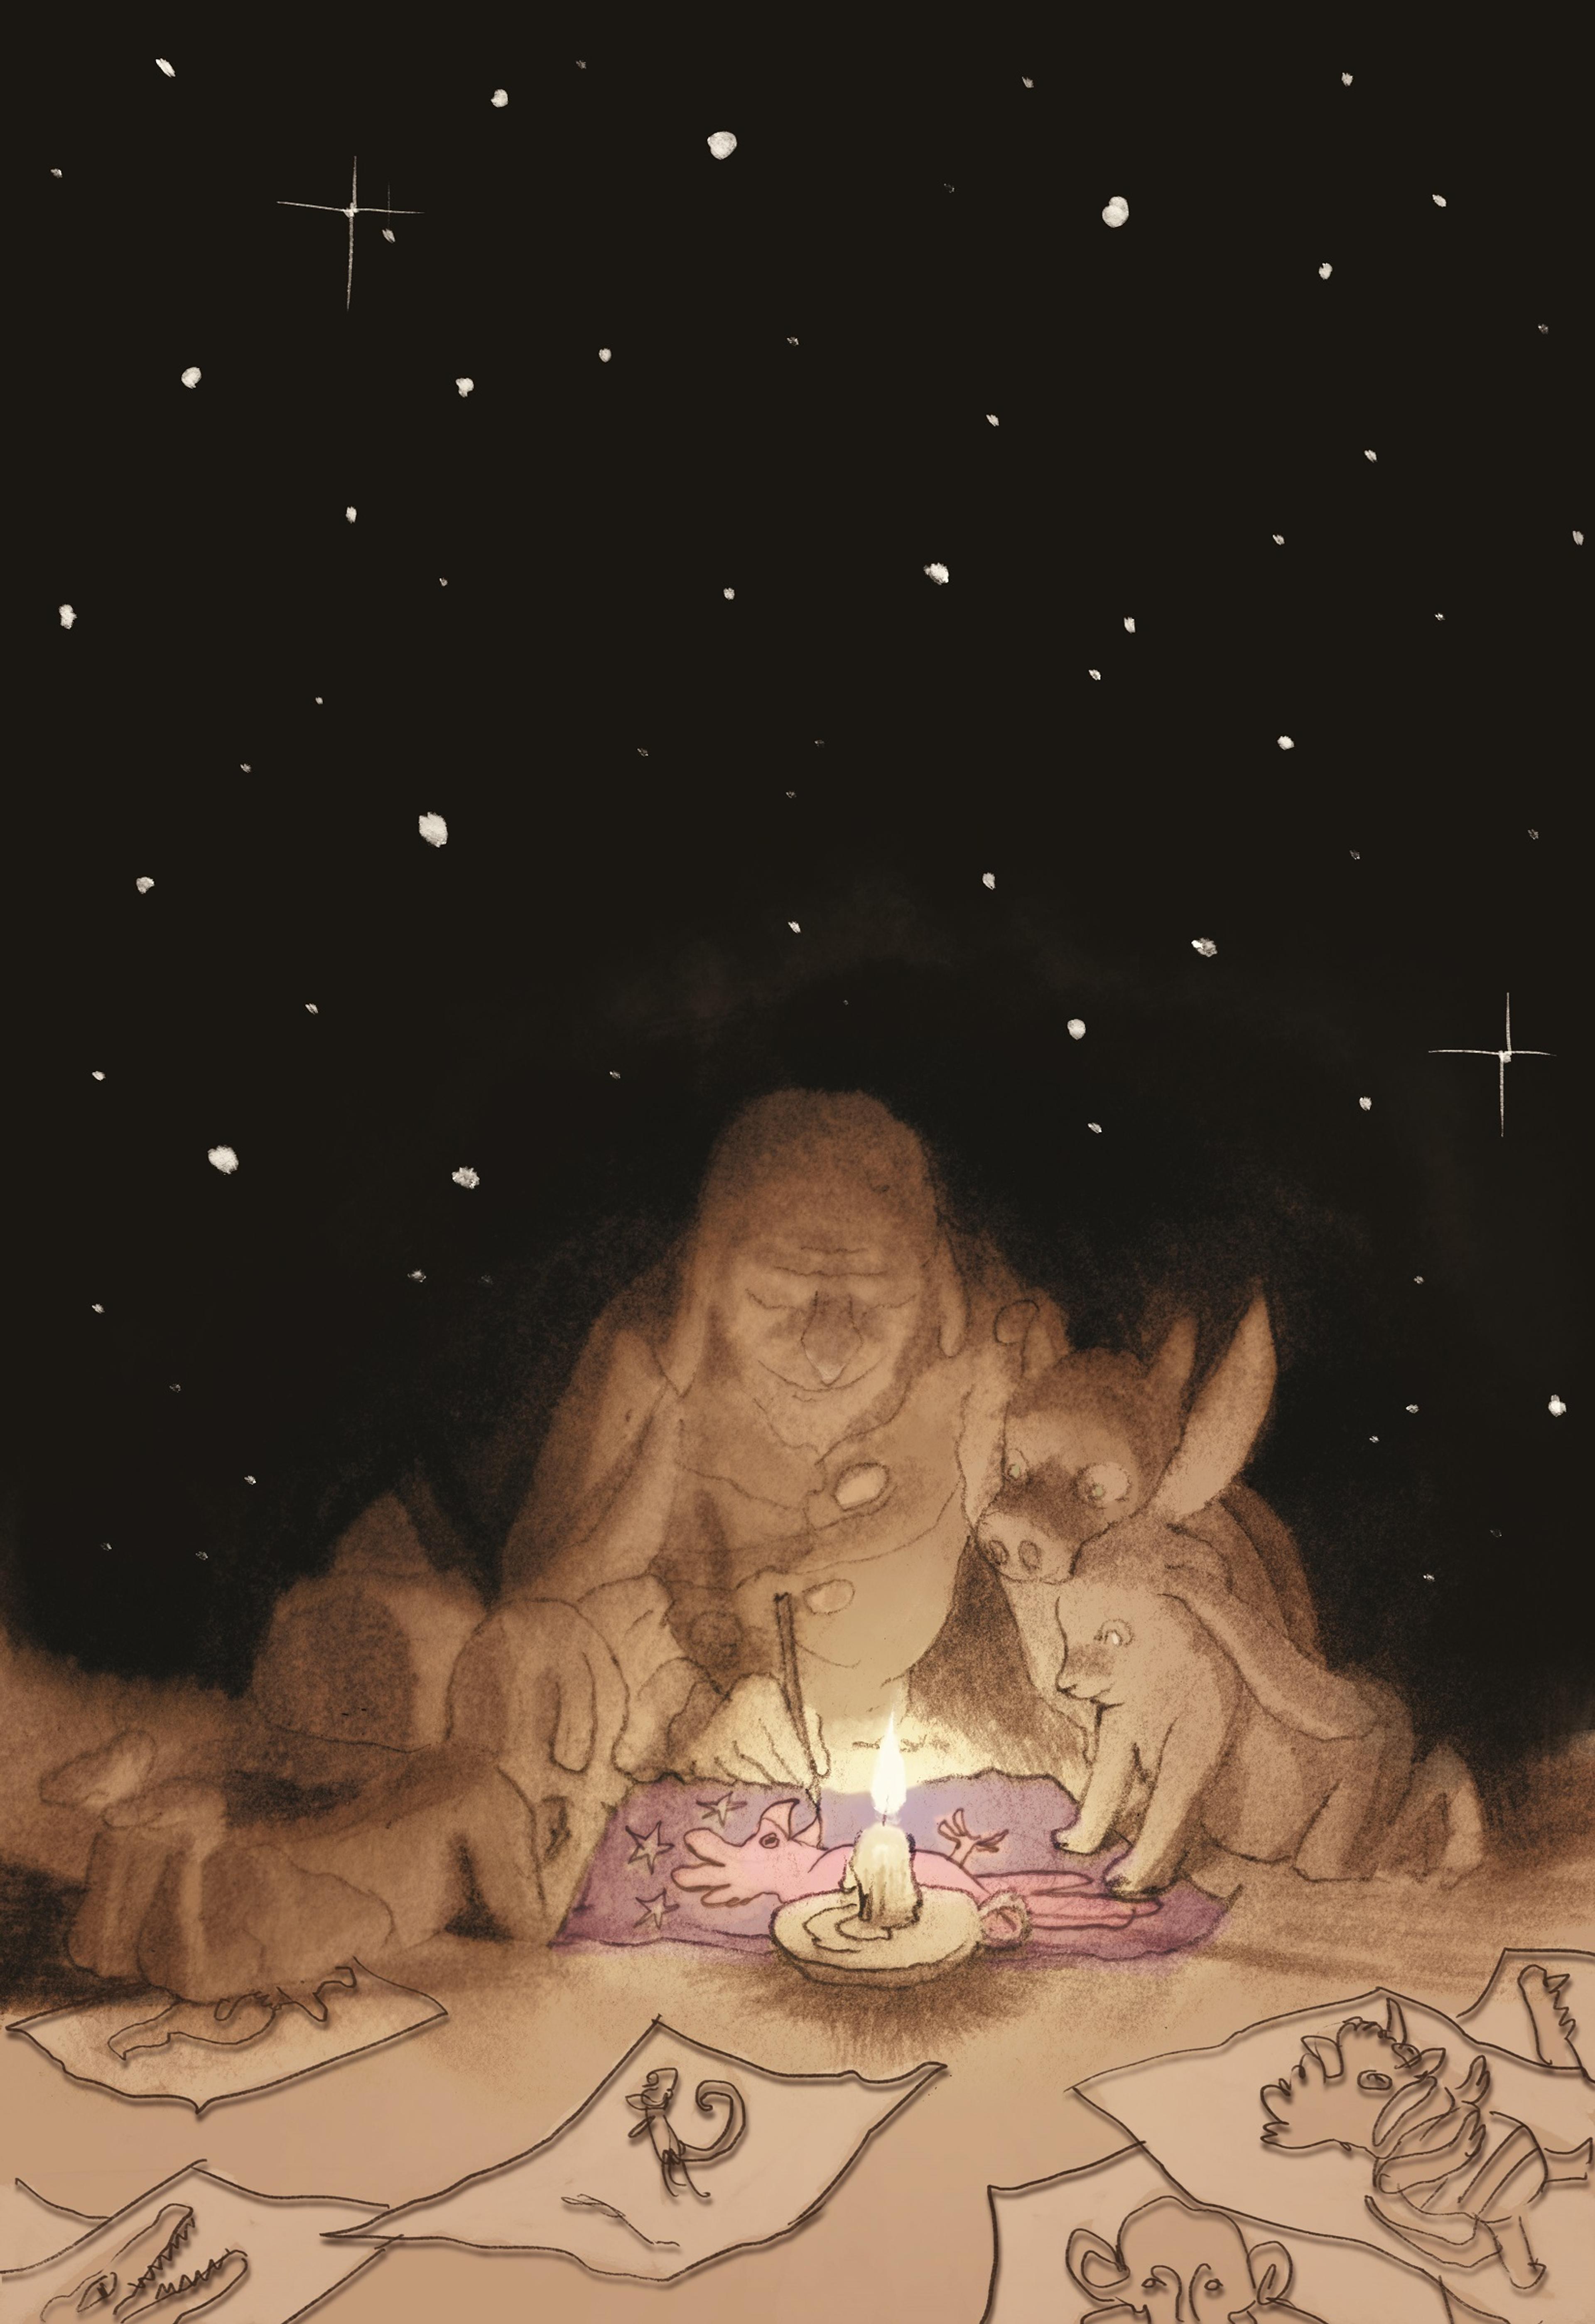 Illustration of a person drawing a bird by candle light, watched by little animals